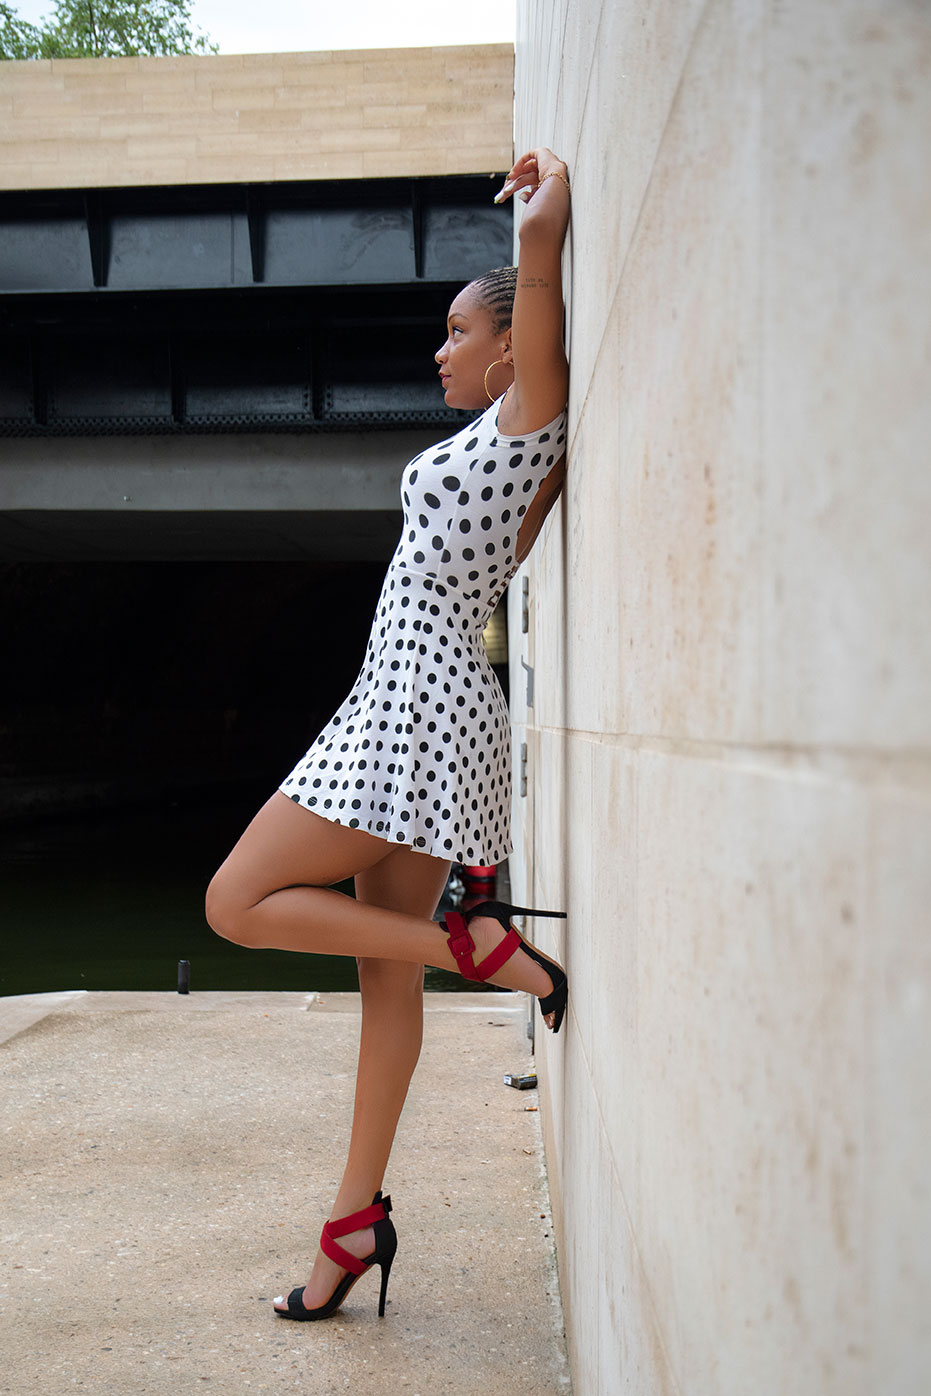 Laetitia, the beautiful black pinup girl in sexy dress and high heels at Paris Bastille, France 2021 (Nos Dren).